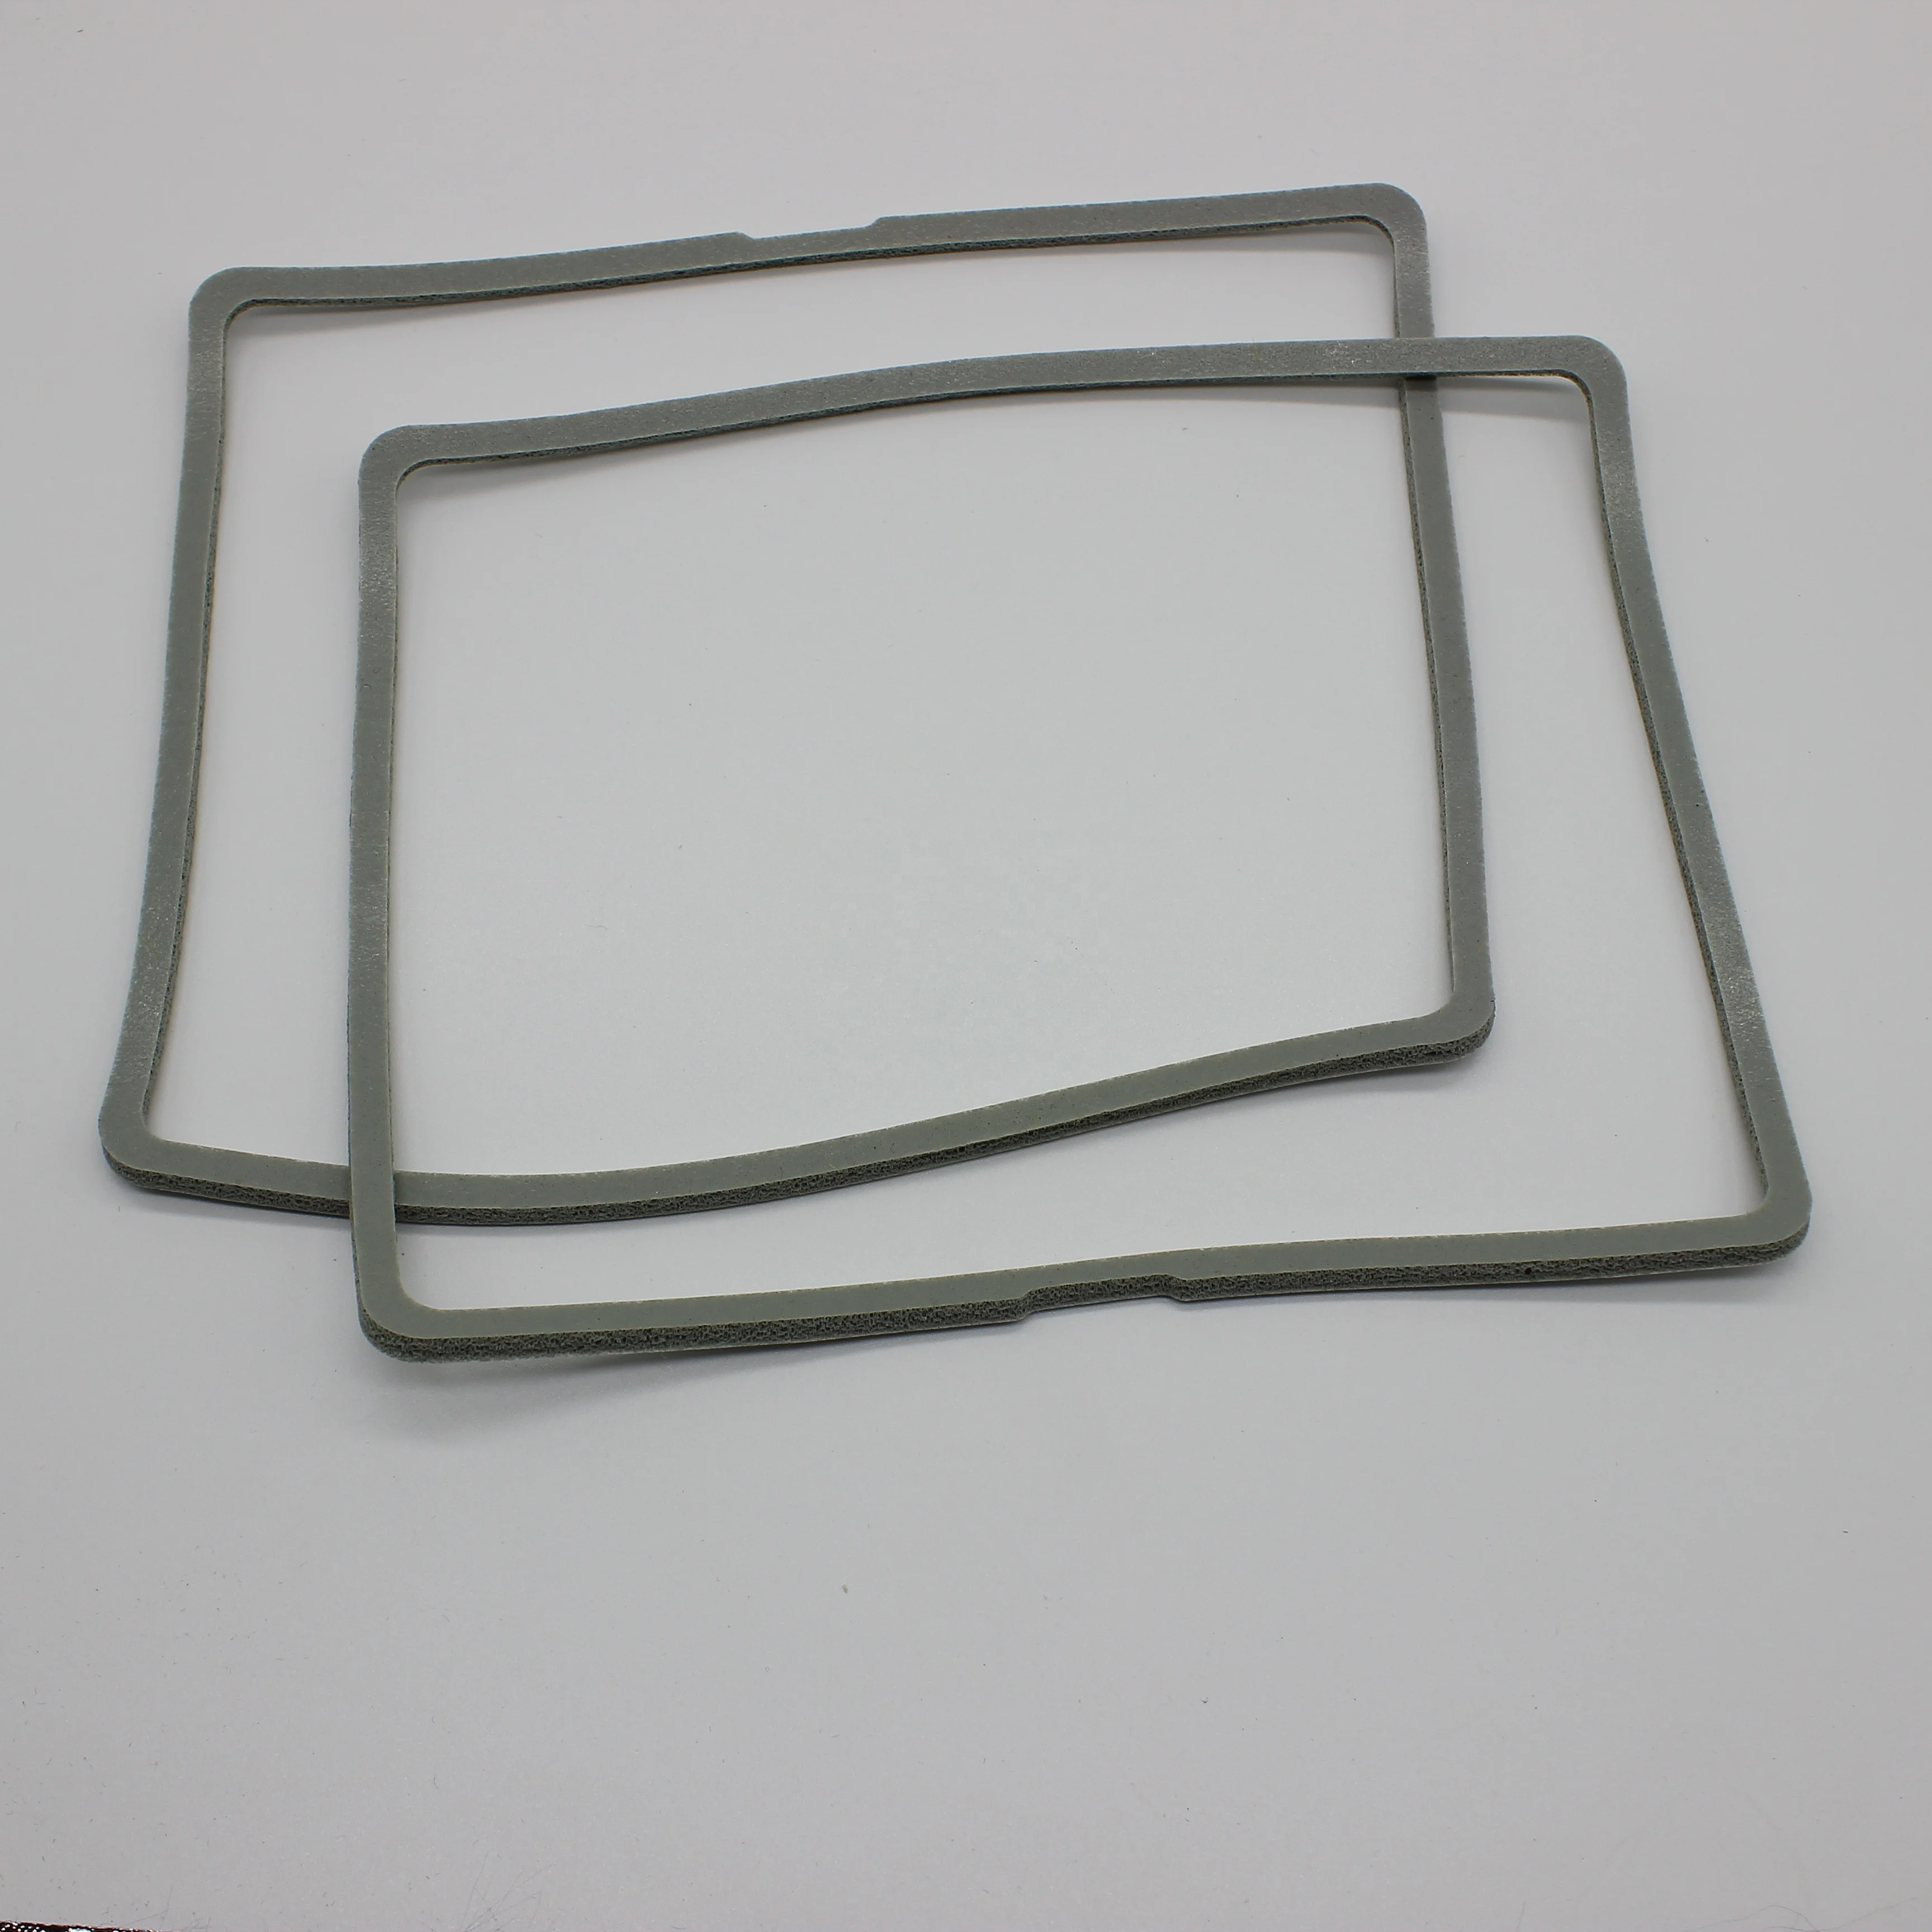 Customized Rectangular Rubber Seal Gasket, Square EPDM Rubber Gasket, Food Grade Silicone Gasket